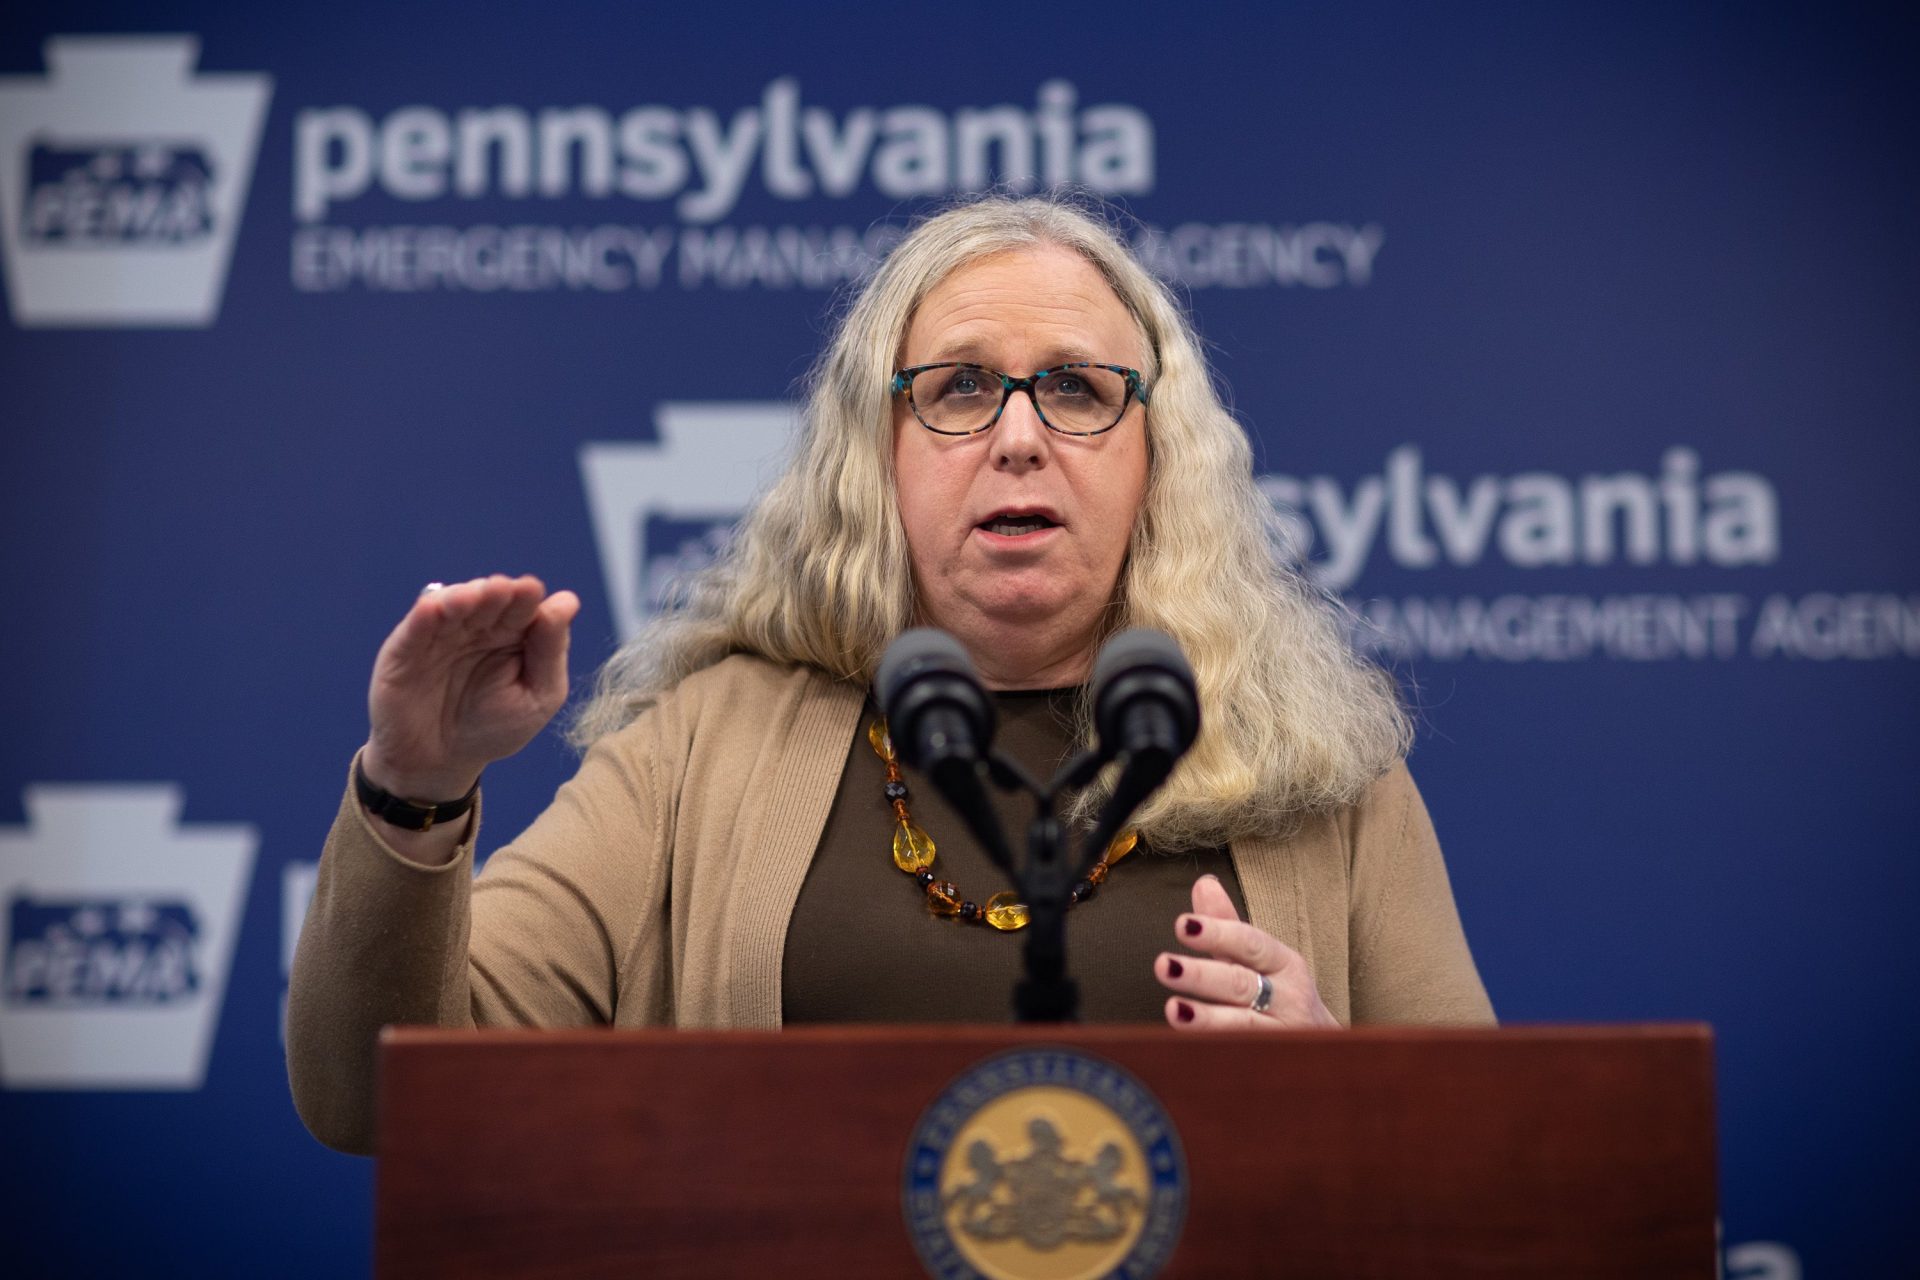 Health Secretary Rachel Levine said in early June her department is "working to update and rewrite our regulations to ensure that they protect the residents of today and tomorrow."